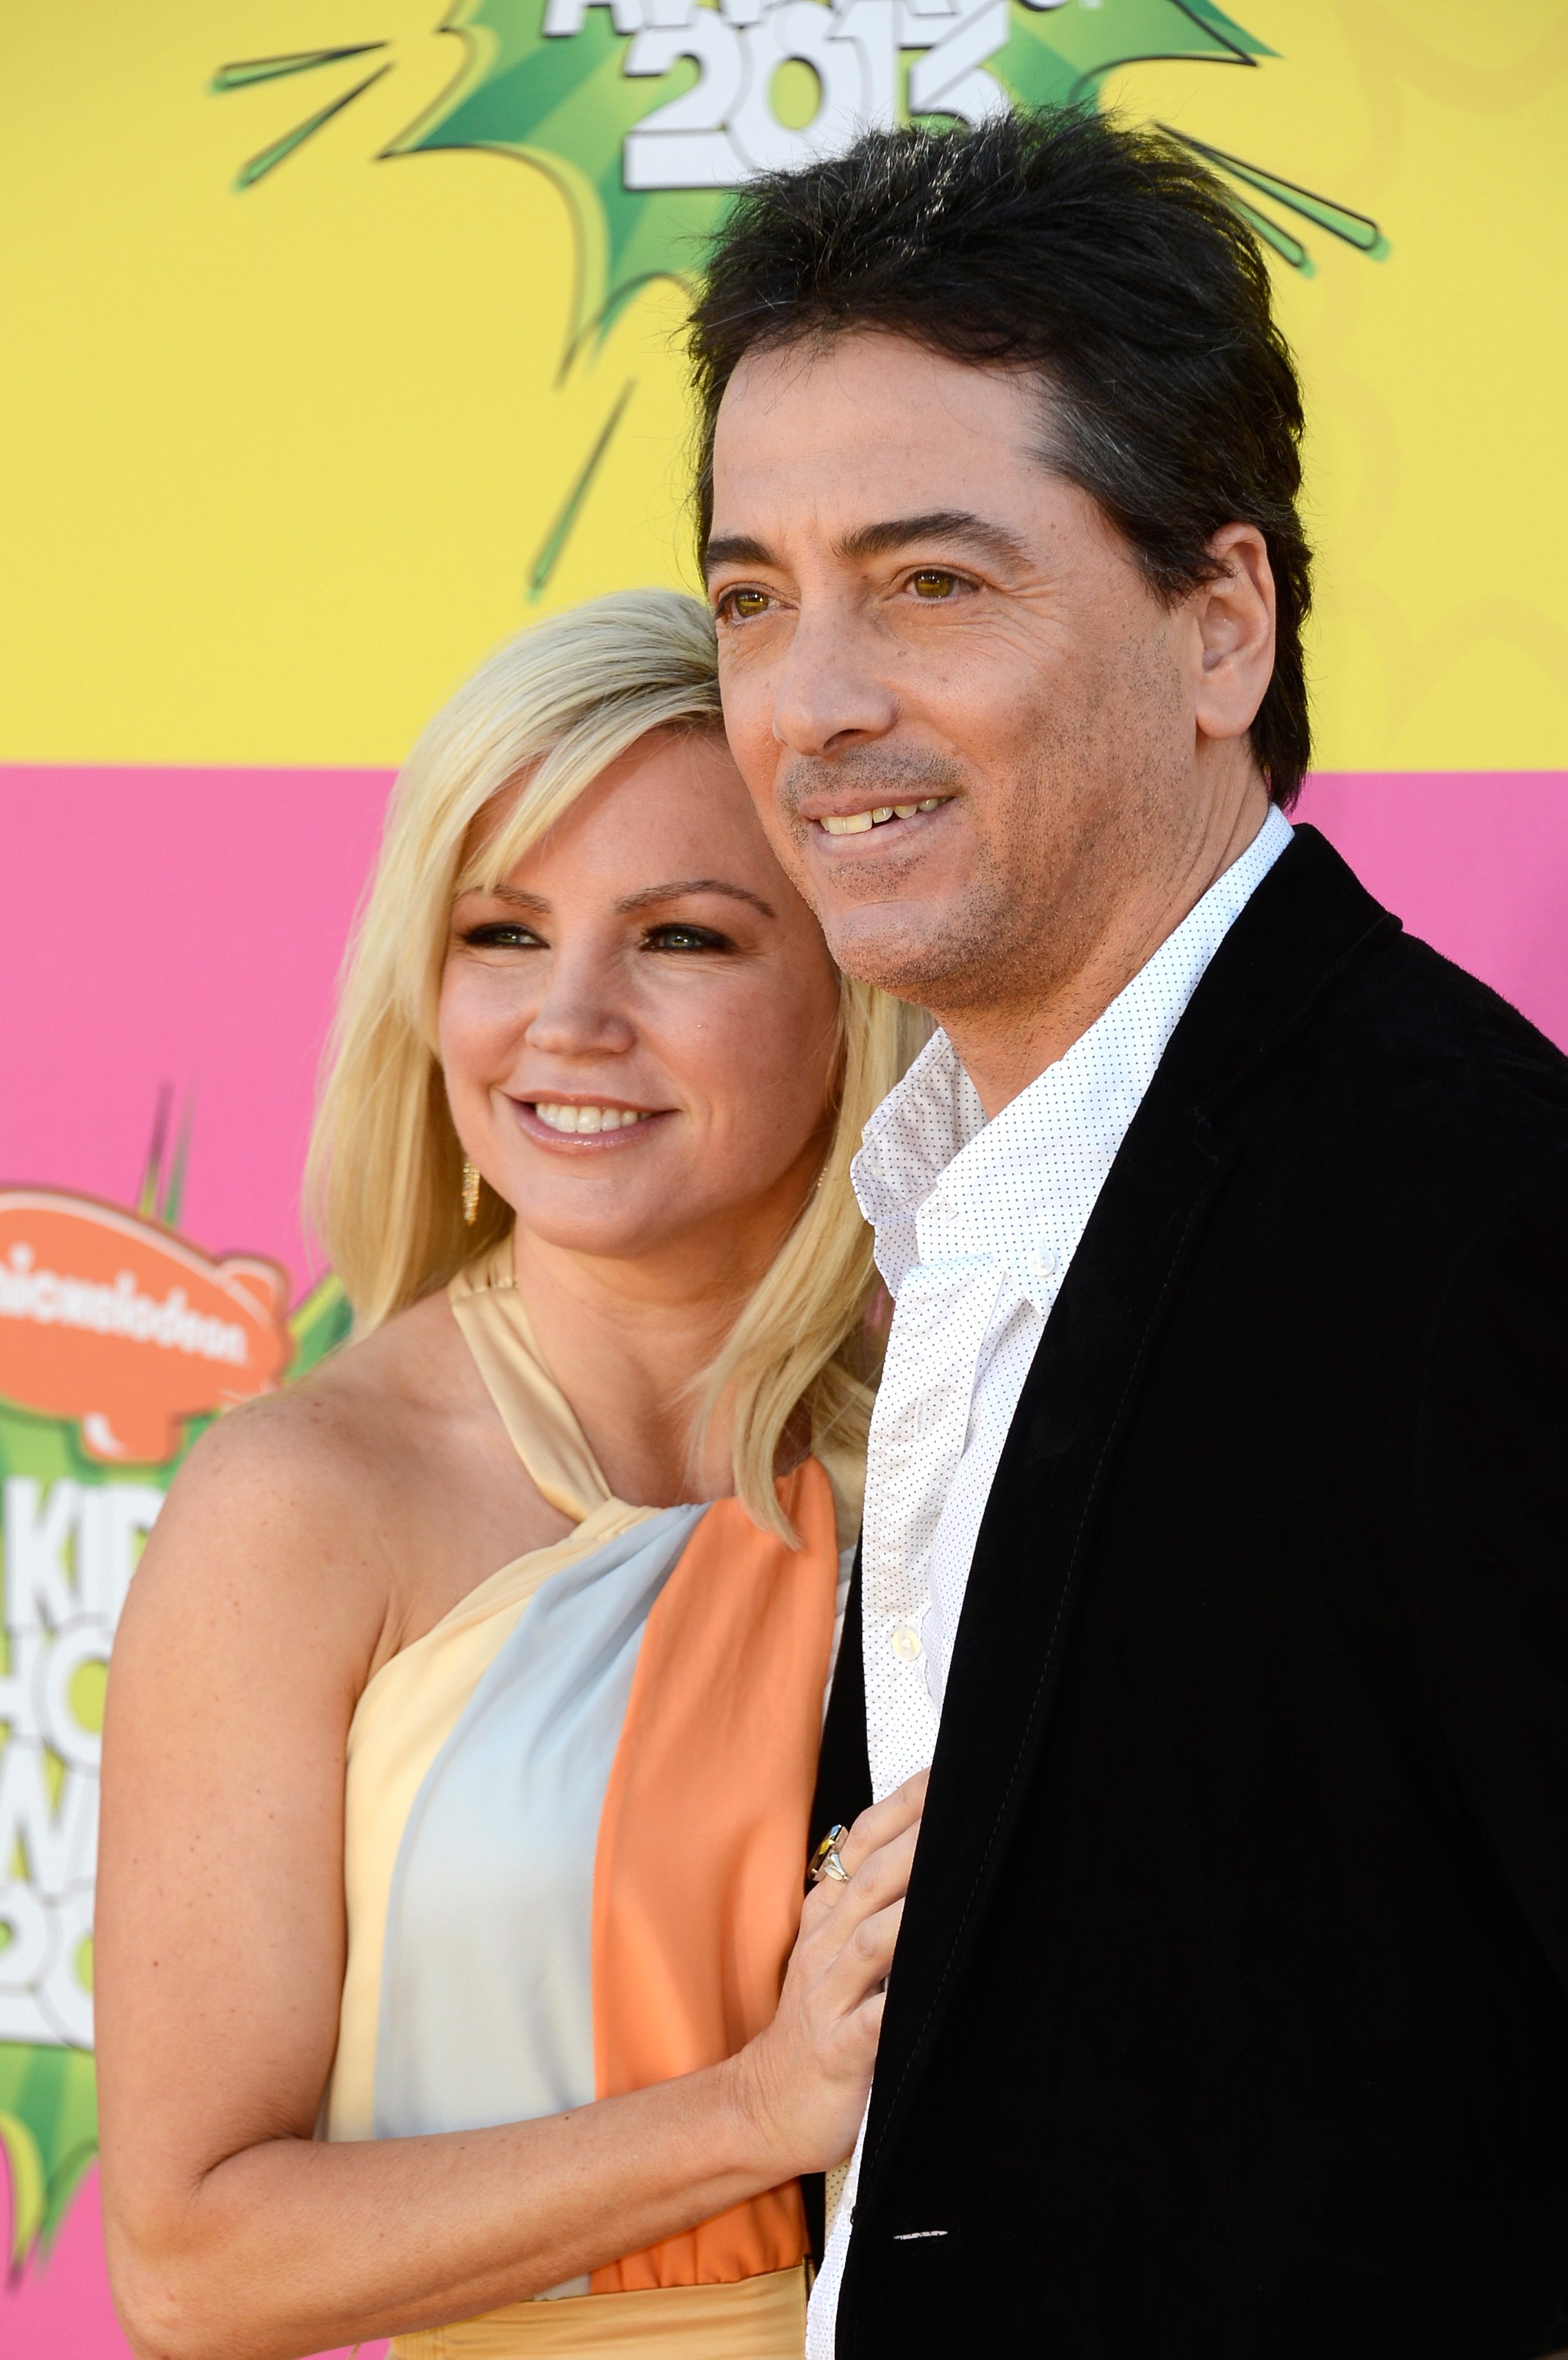 Scott Baio and Renee Sloan arriving at Nickelodeon's 26th Annual Kids' Choice Awards at USC Galen Center on March 23, 2013 in Los Angeles, California. / Source: Getty Images